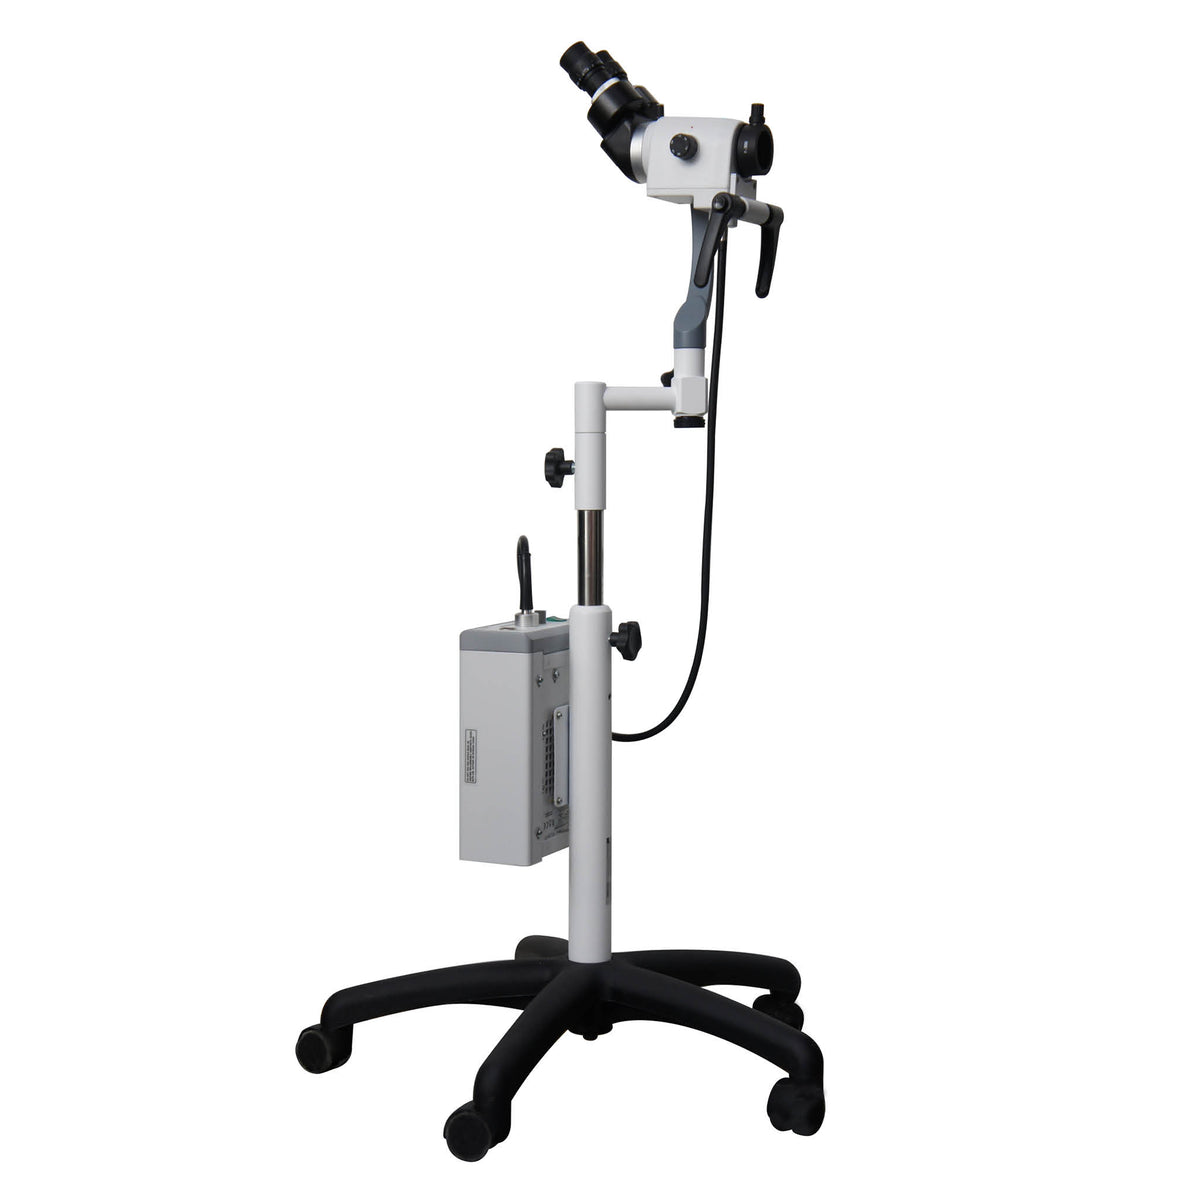 Ecleris Colposcope Mini C-100 A has been designed as a portable unit with minimal floor space requirements.